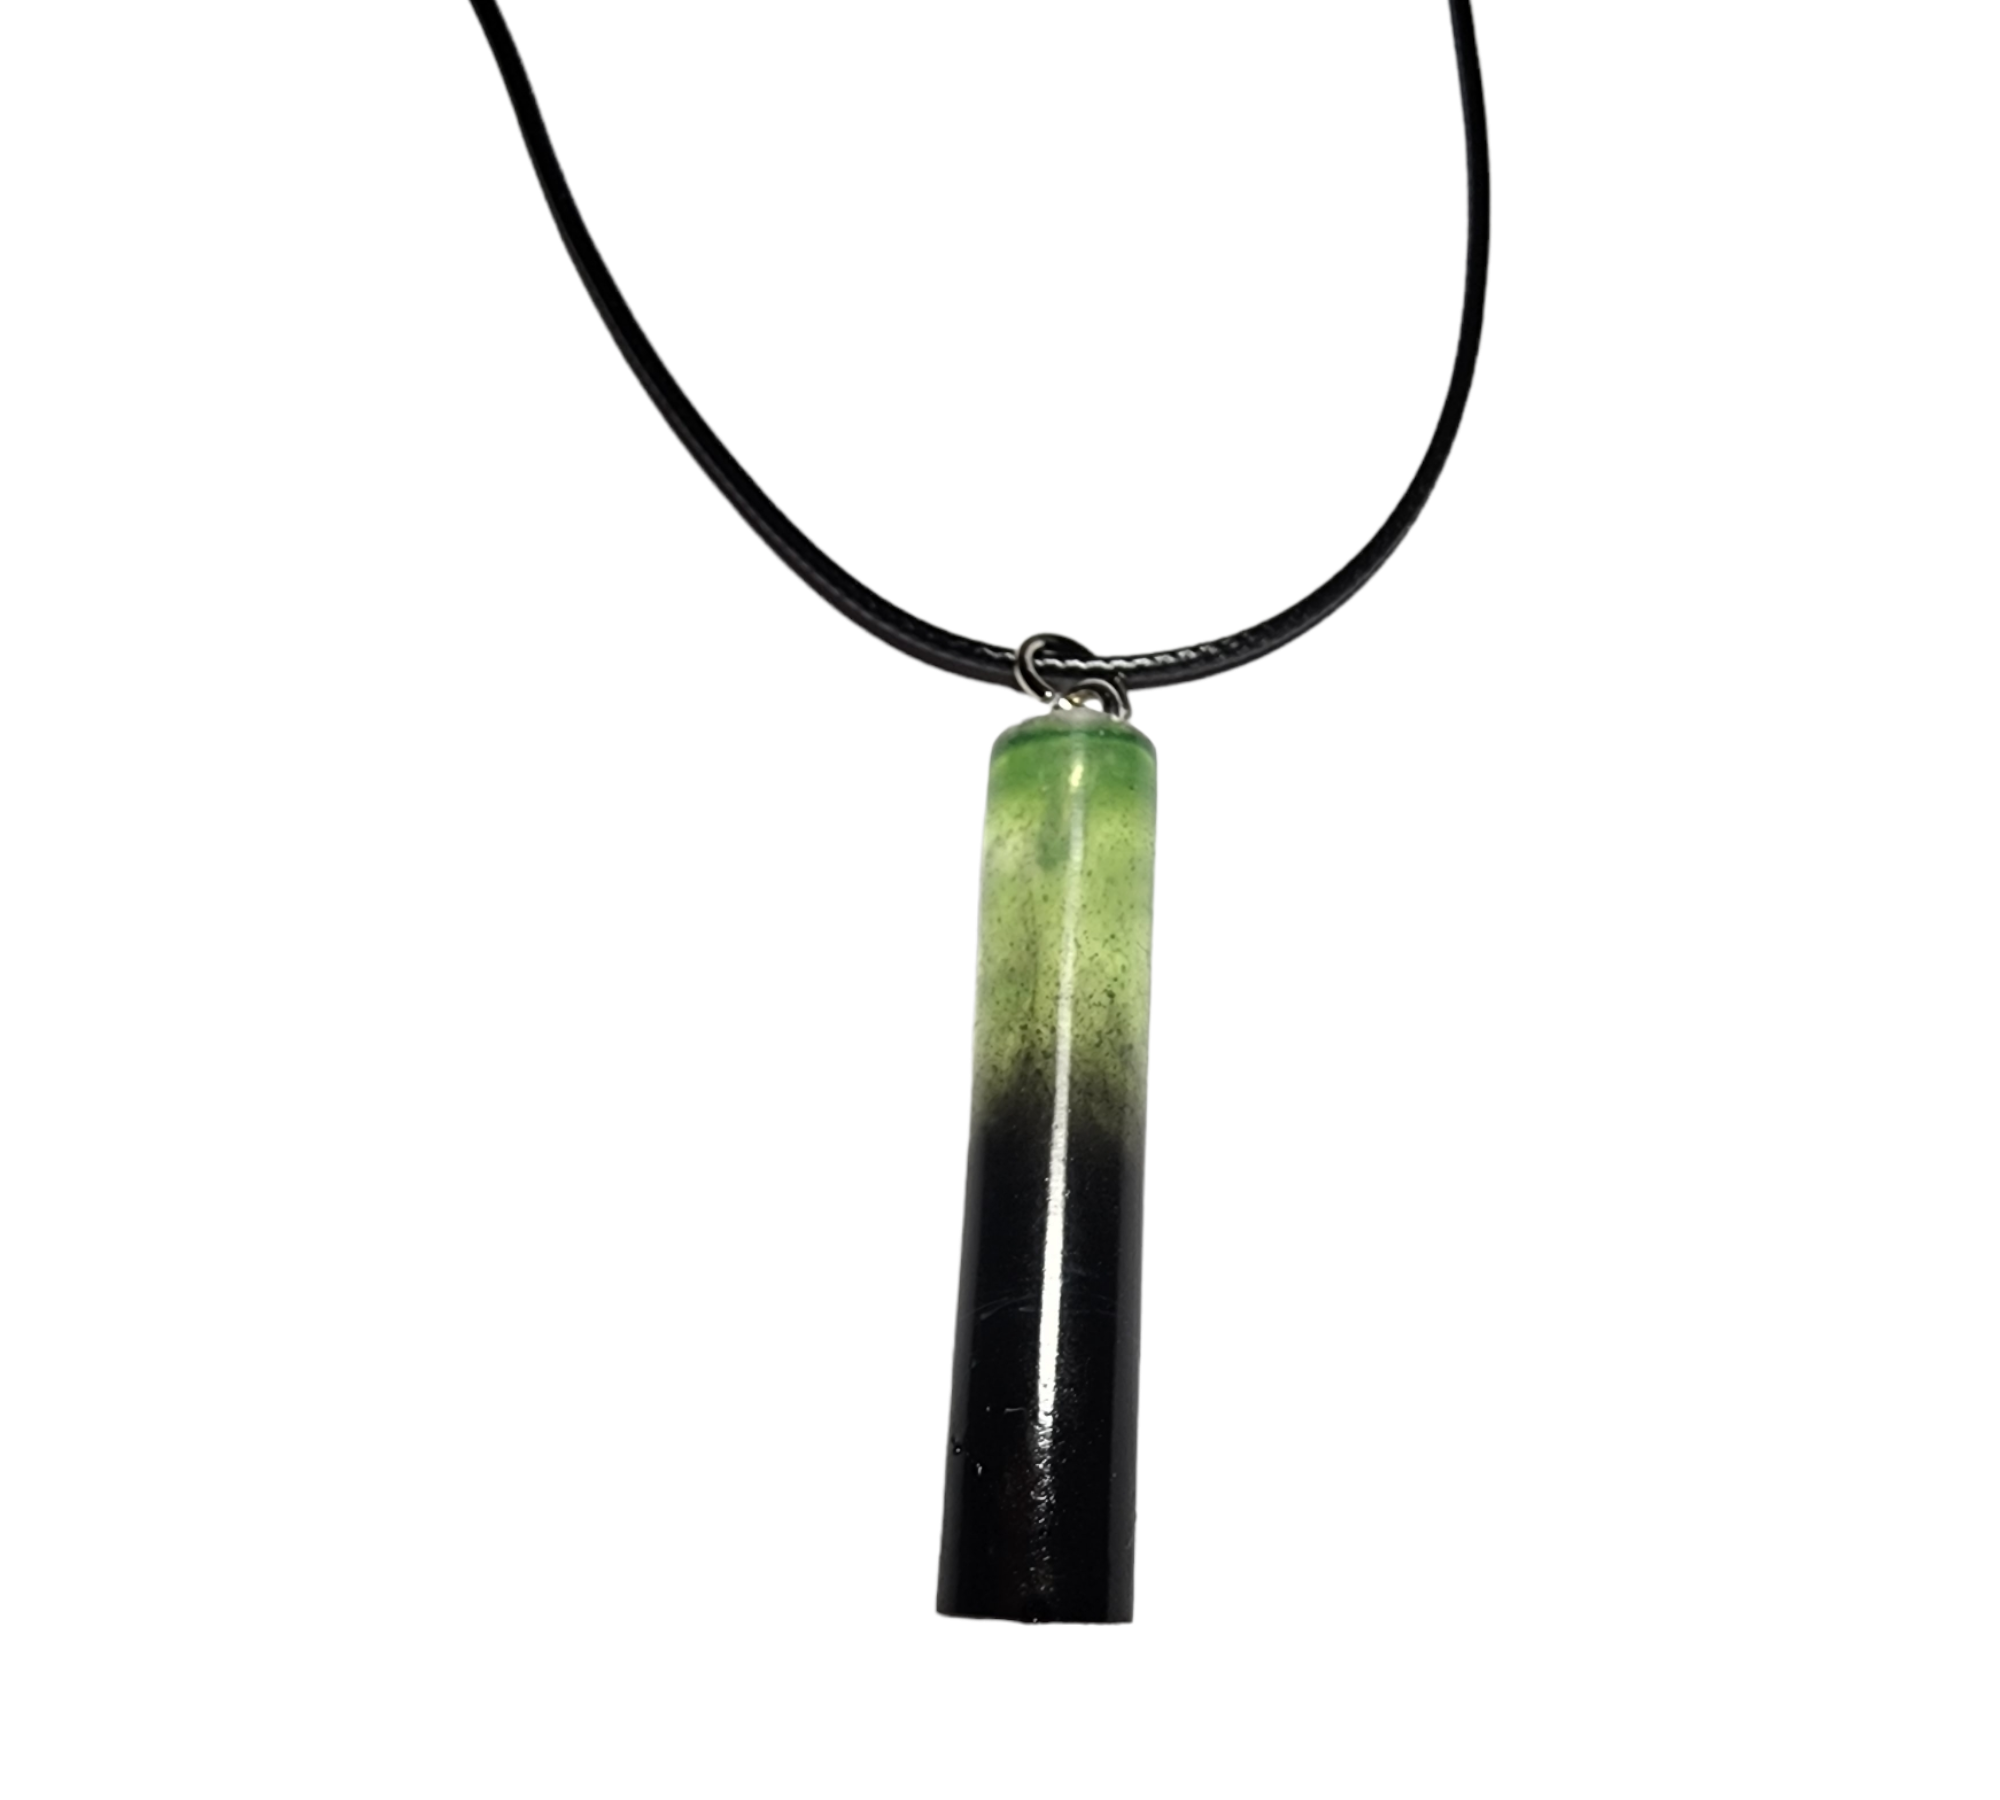 Cool green color long necklace!